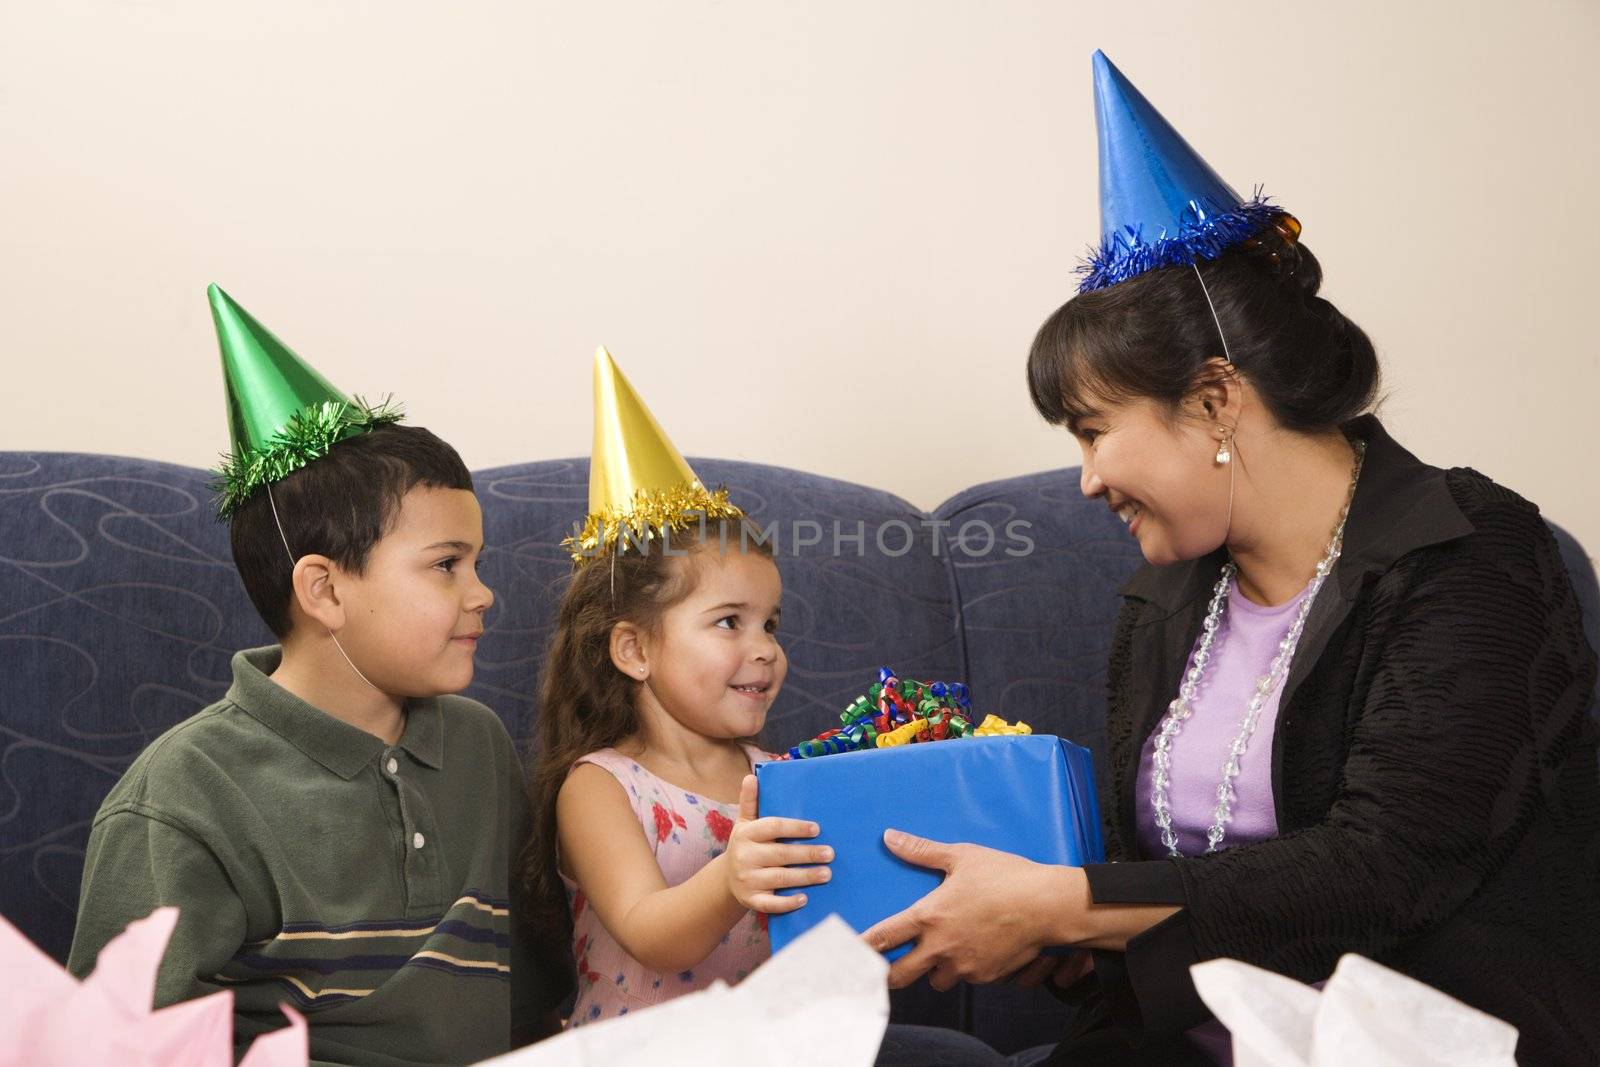 Mother giving present to daughter at birthday party.